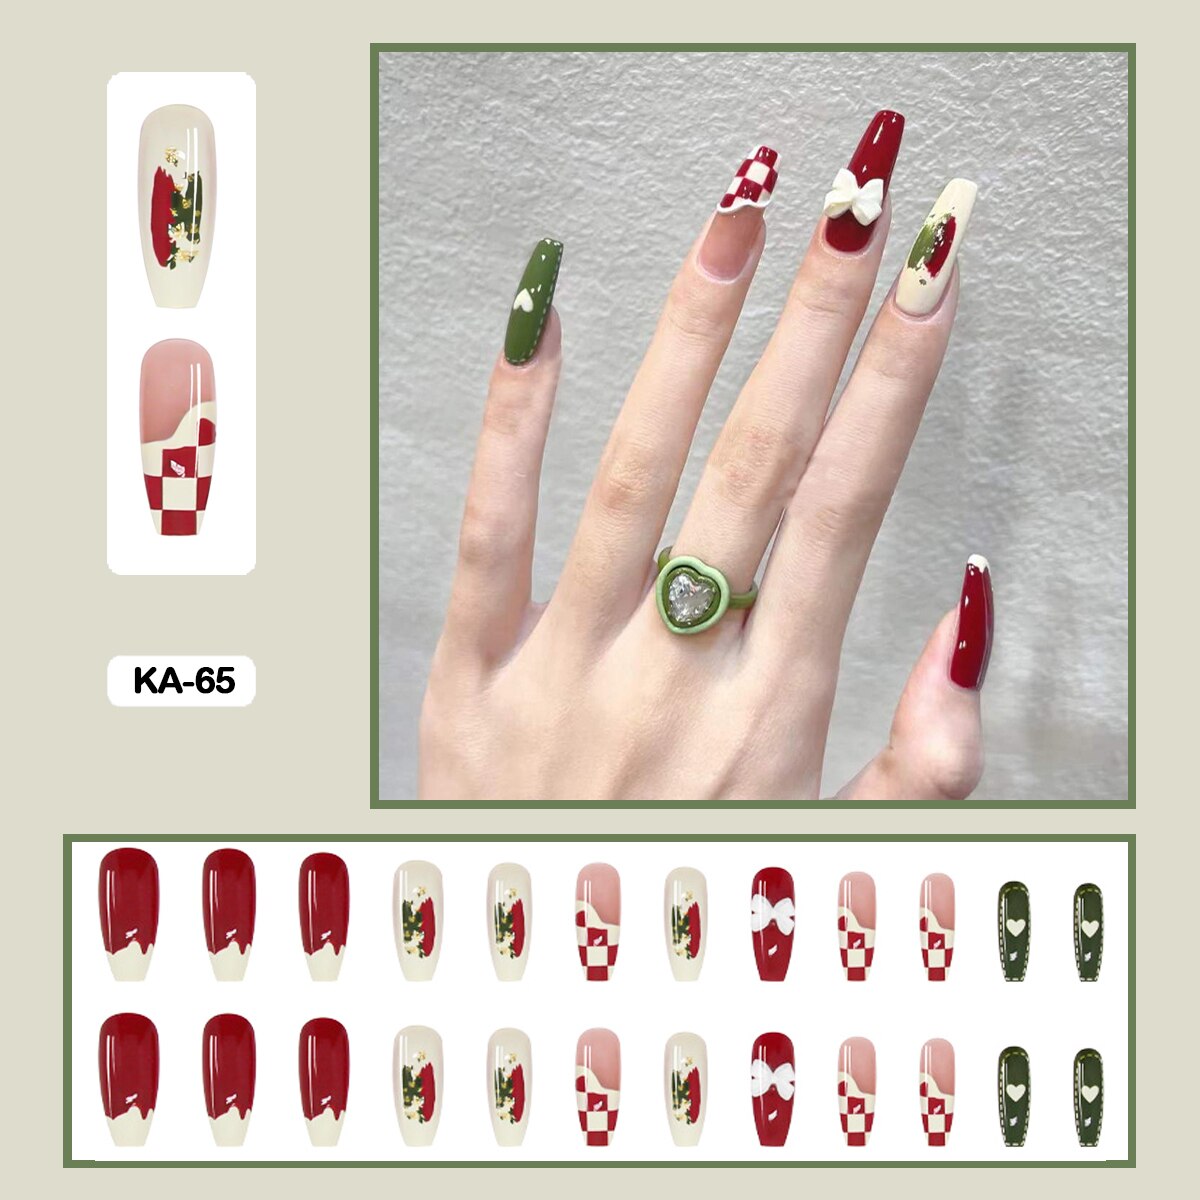 Graduation gifts 24pcs/box  Lovely Checked-pattern Press On Nails Full Cover Fake Nails With Glue Long Wearable False Nails WIth Wearing Tools